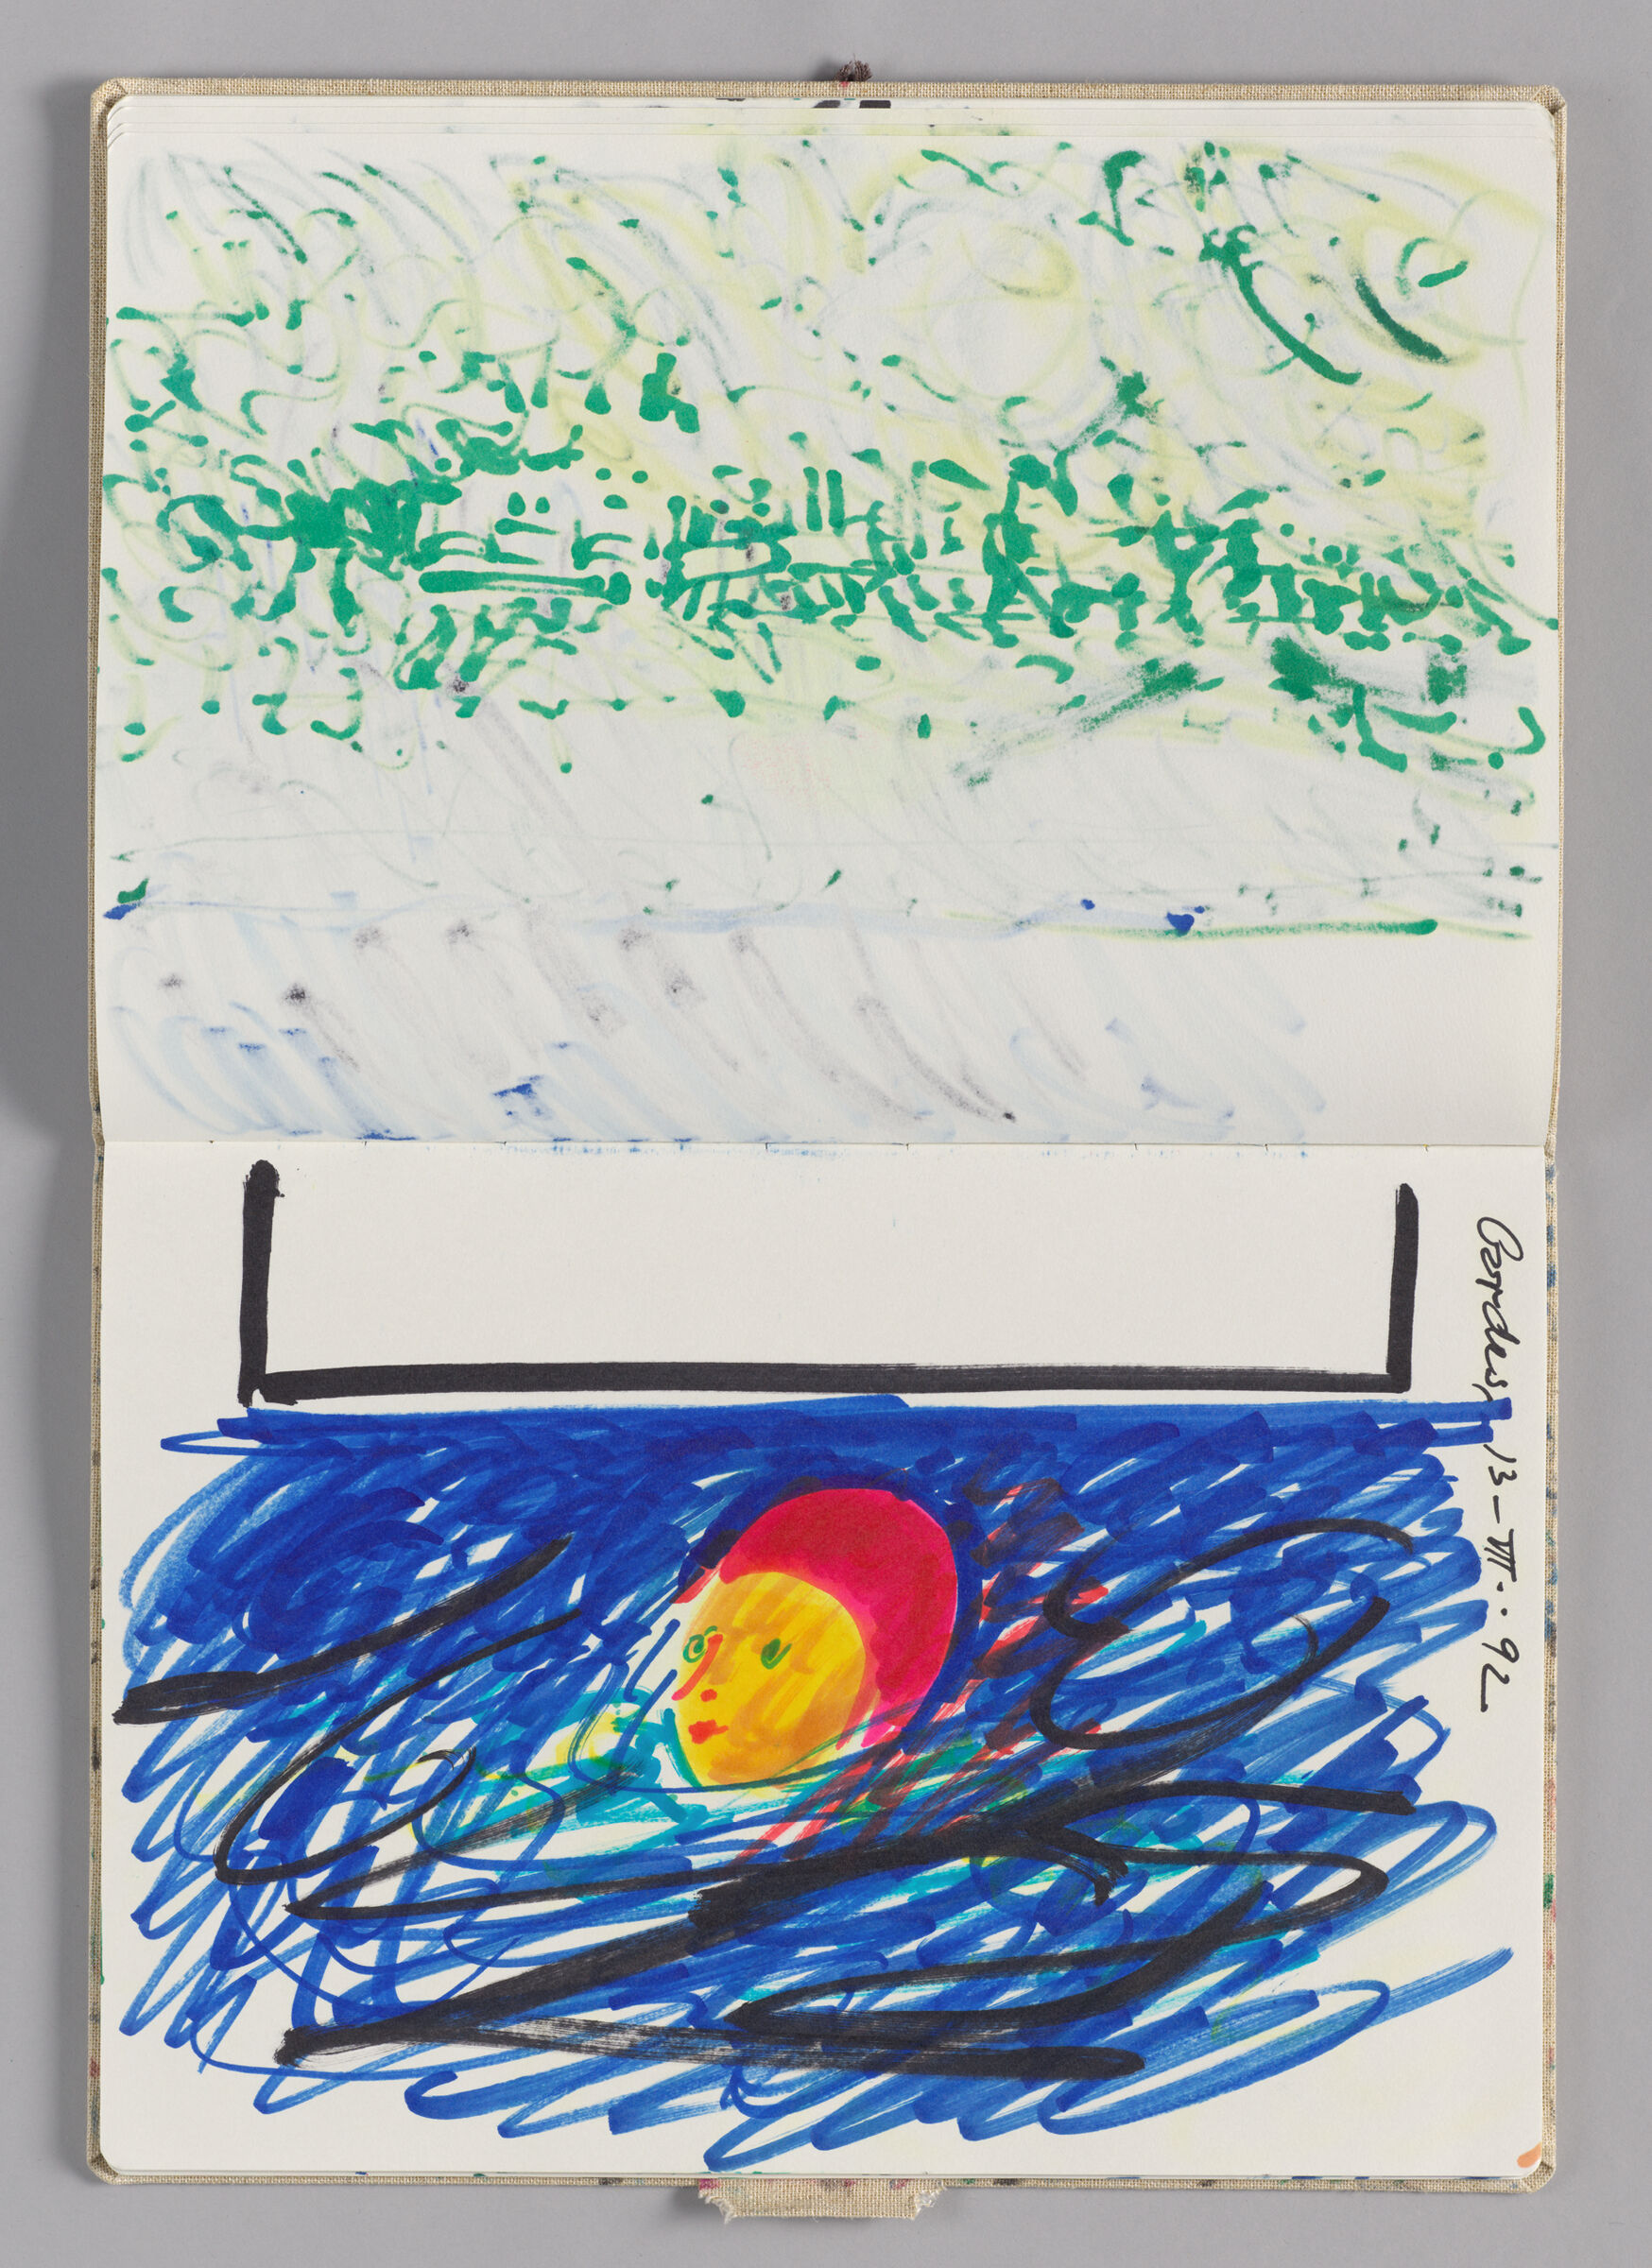 Untitled (Bleed-Through Of Previous Page, Left Page); Untitled (Figure In Pool, Right Page)